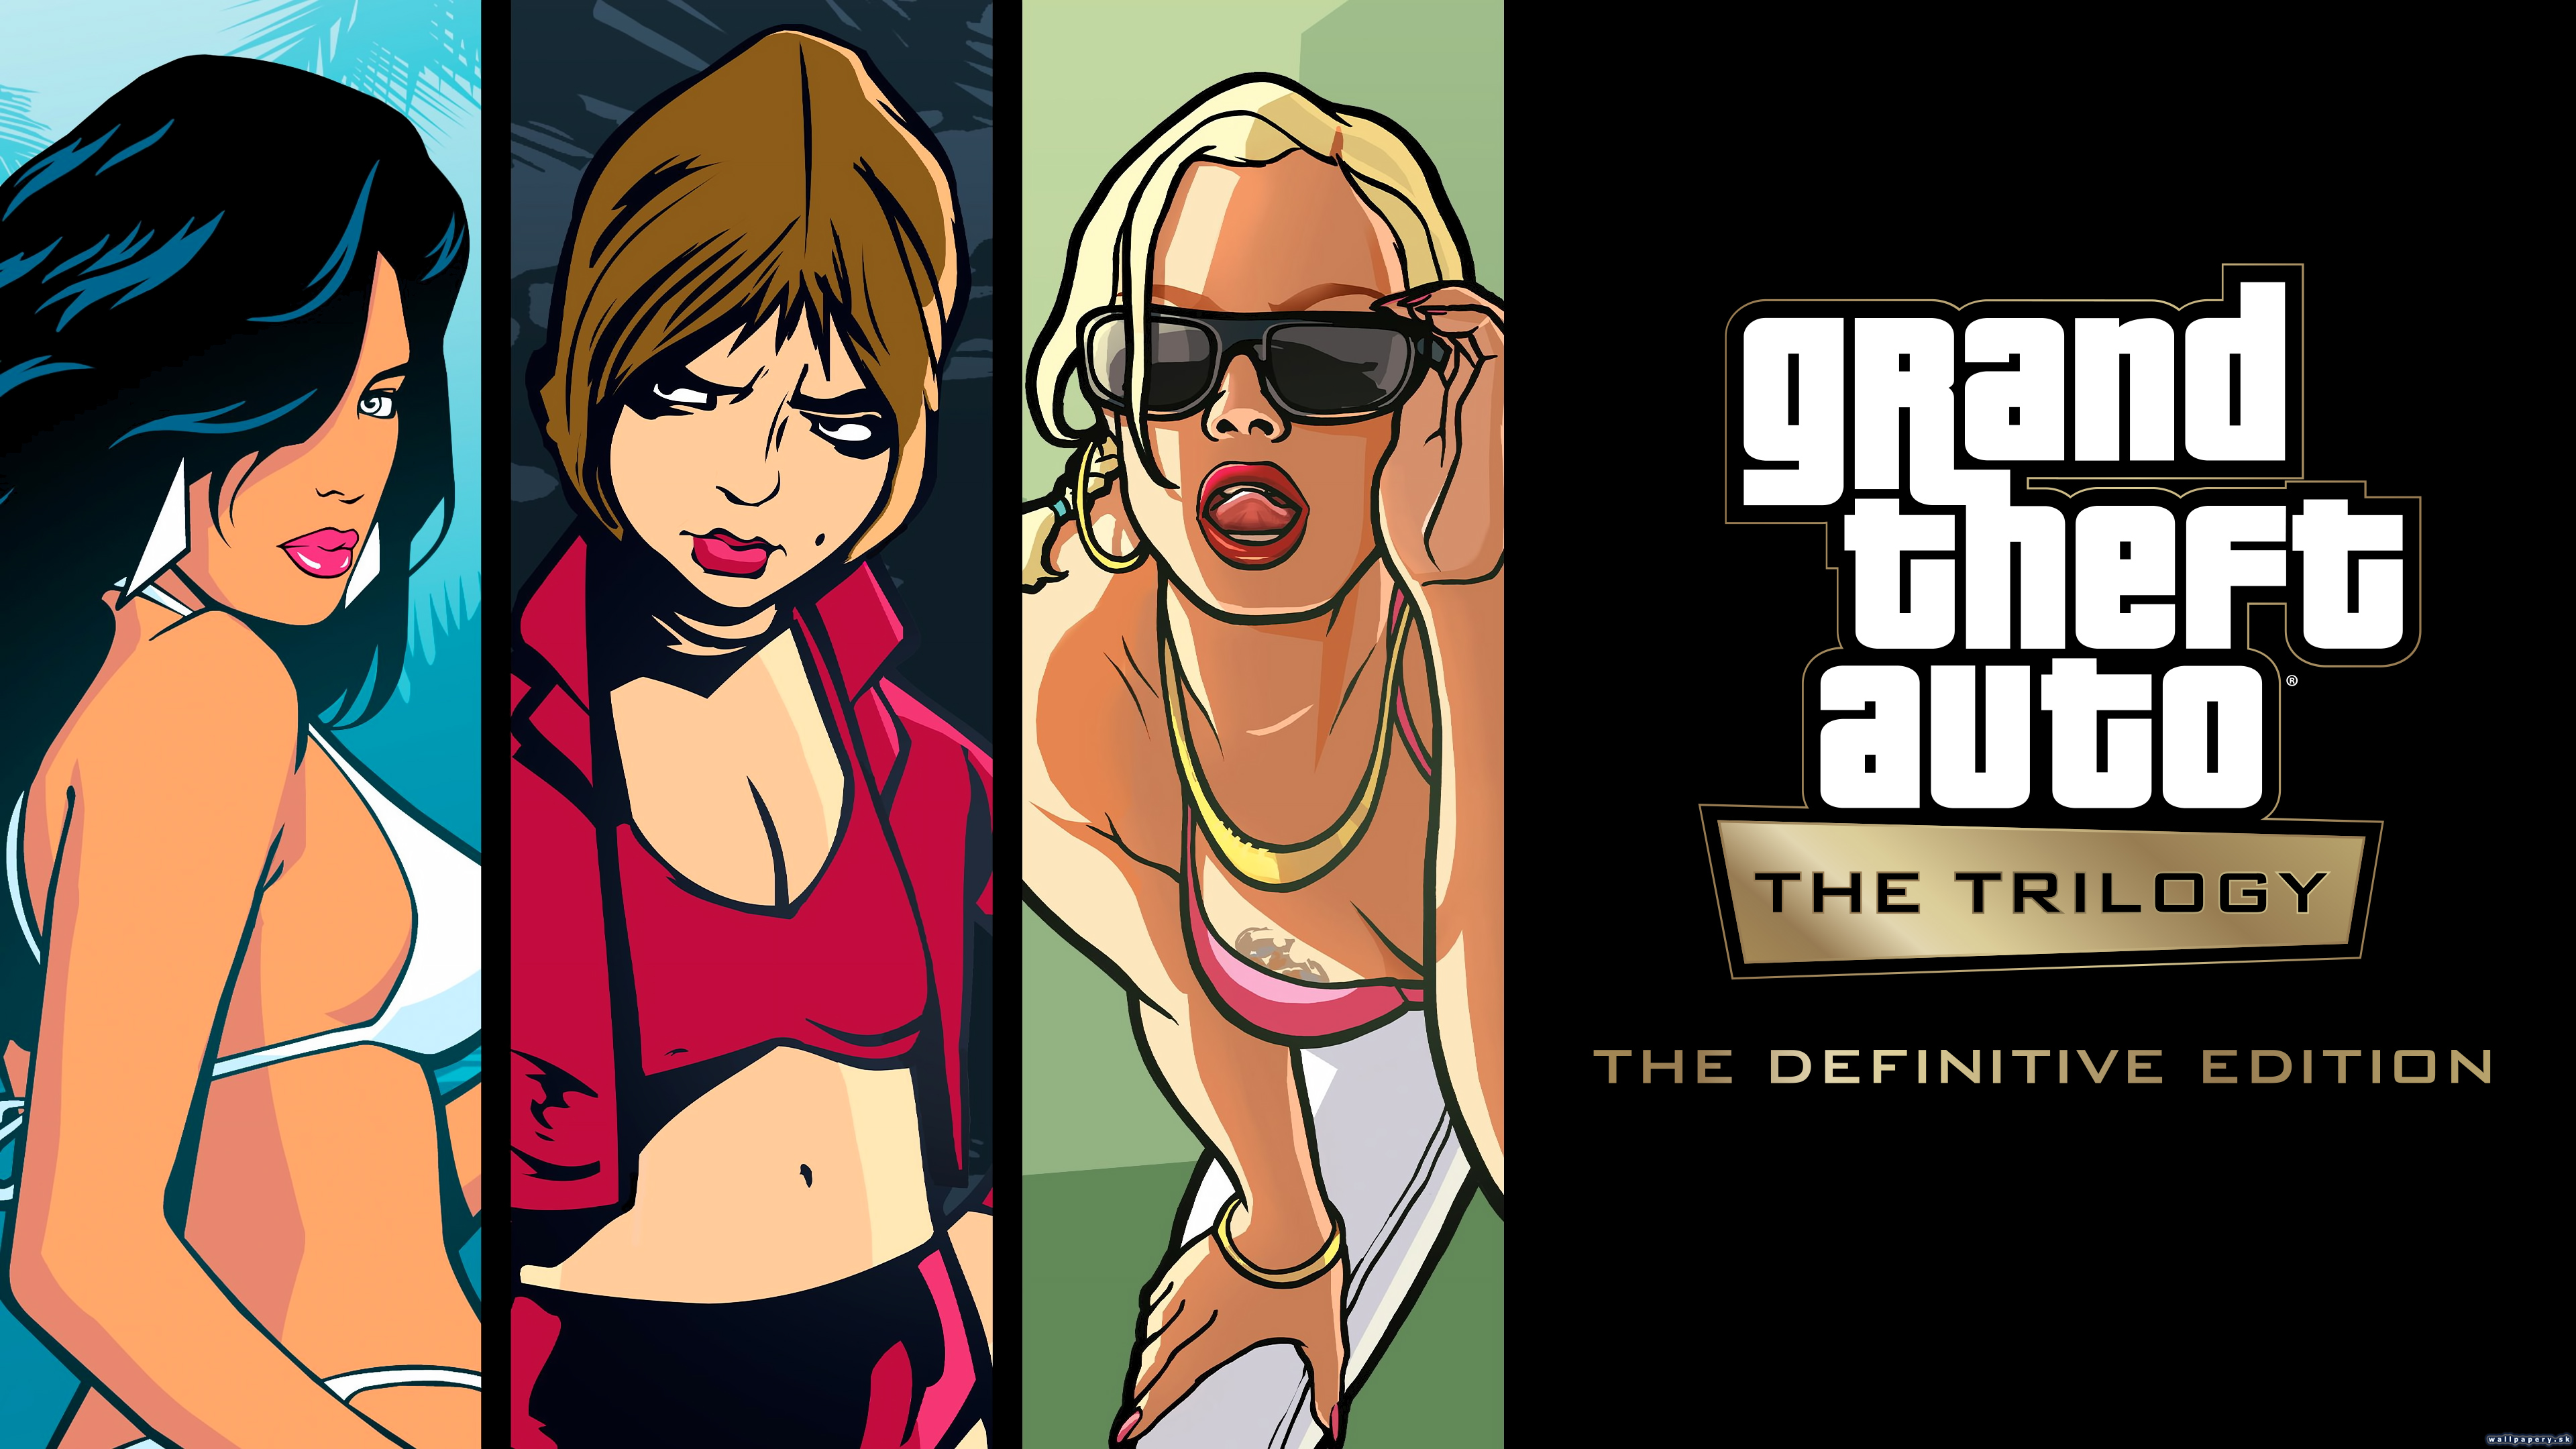 Grand Theft Auto: The Trilogy - The Definitive Edition - wallpaper 2